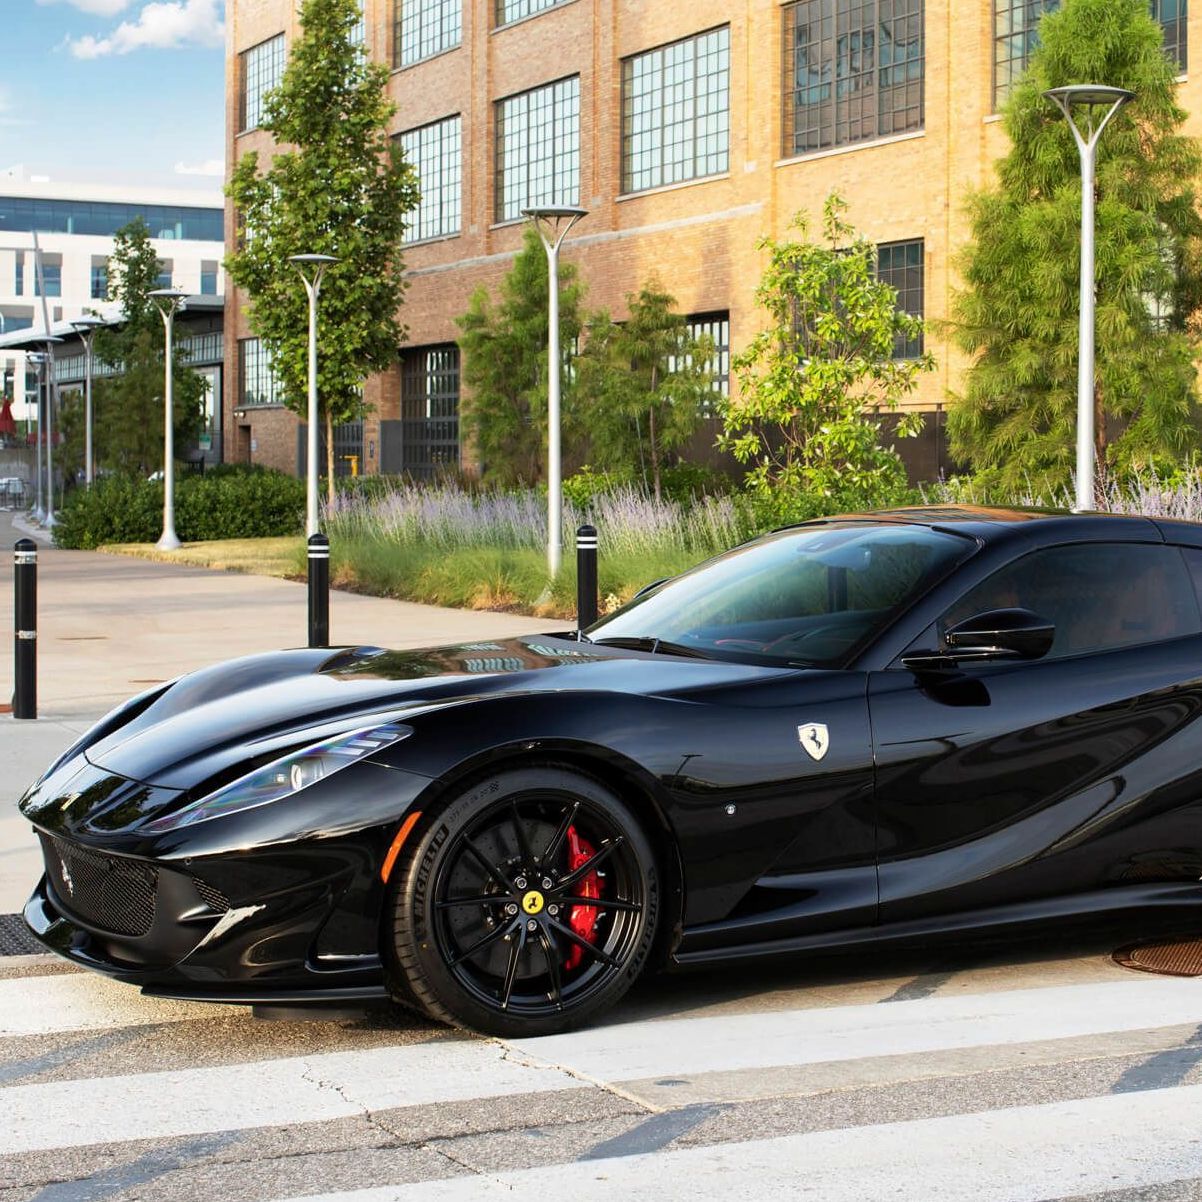 a black sports car is parked in front of a brick building